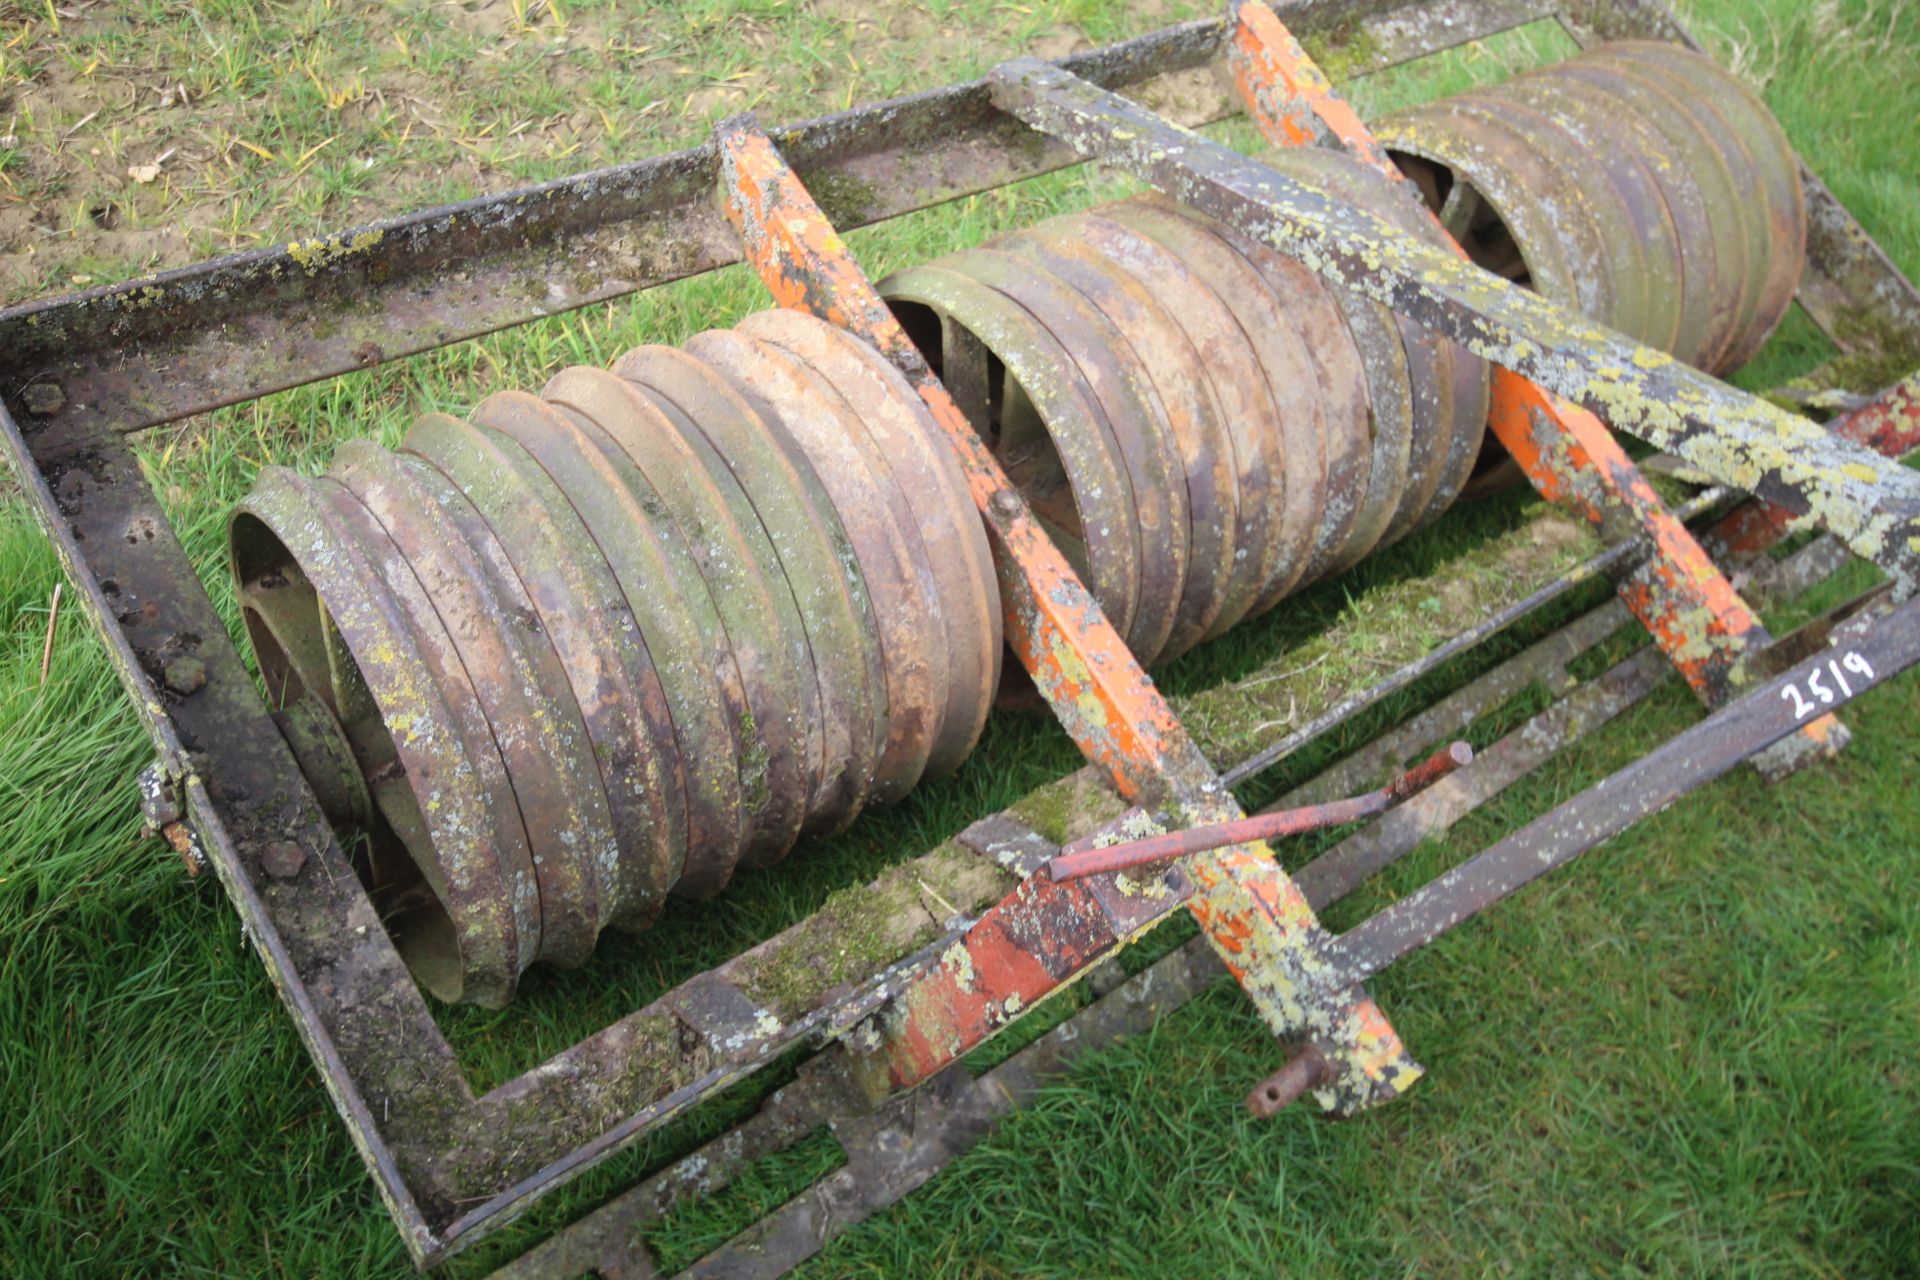 Linkage mounted Cambridge roll. For sale due to retirement. V - Image 9 of 9